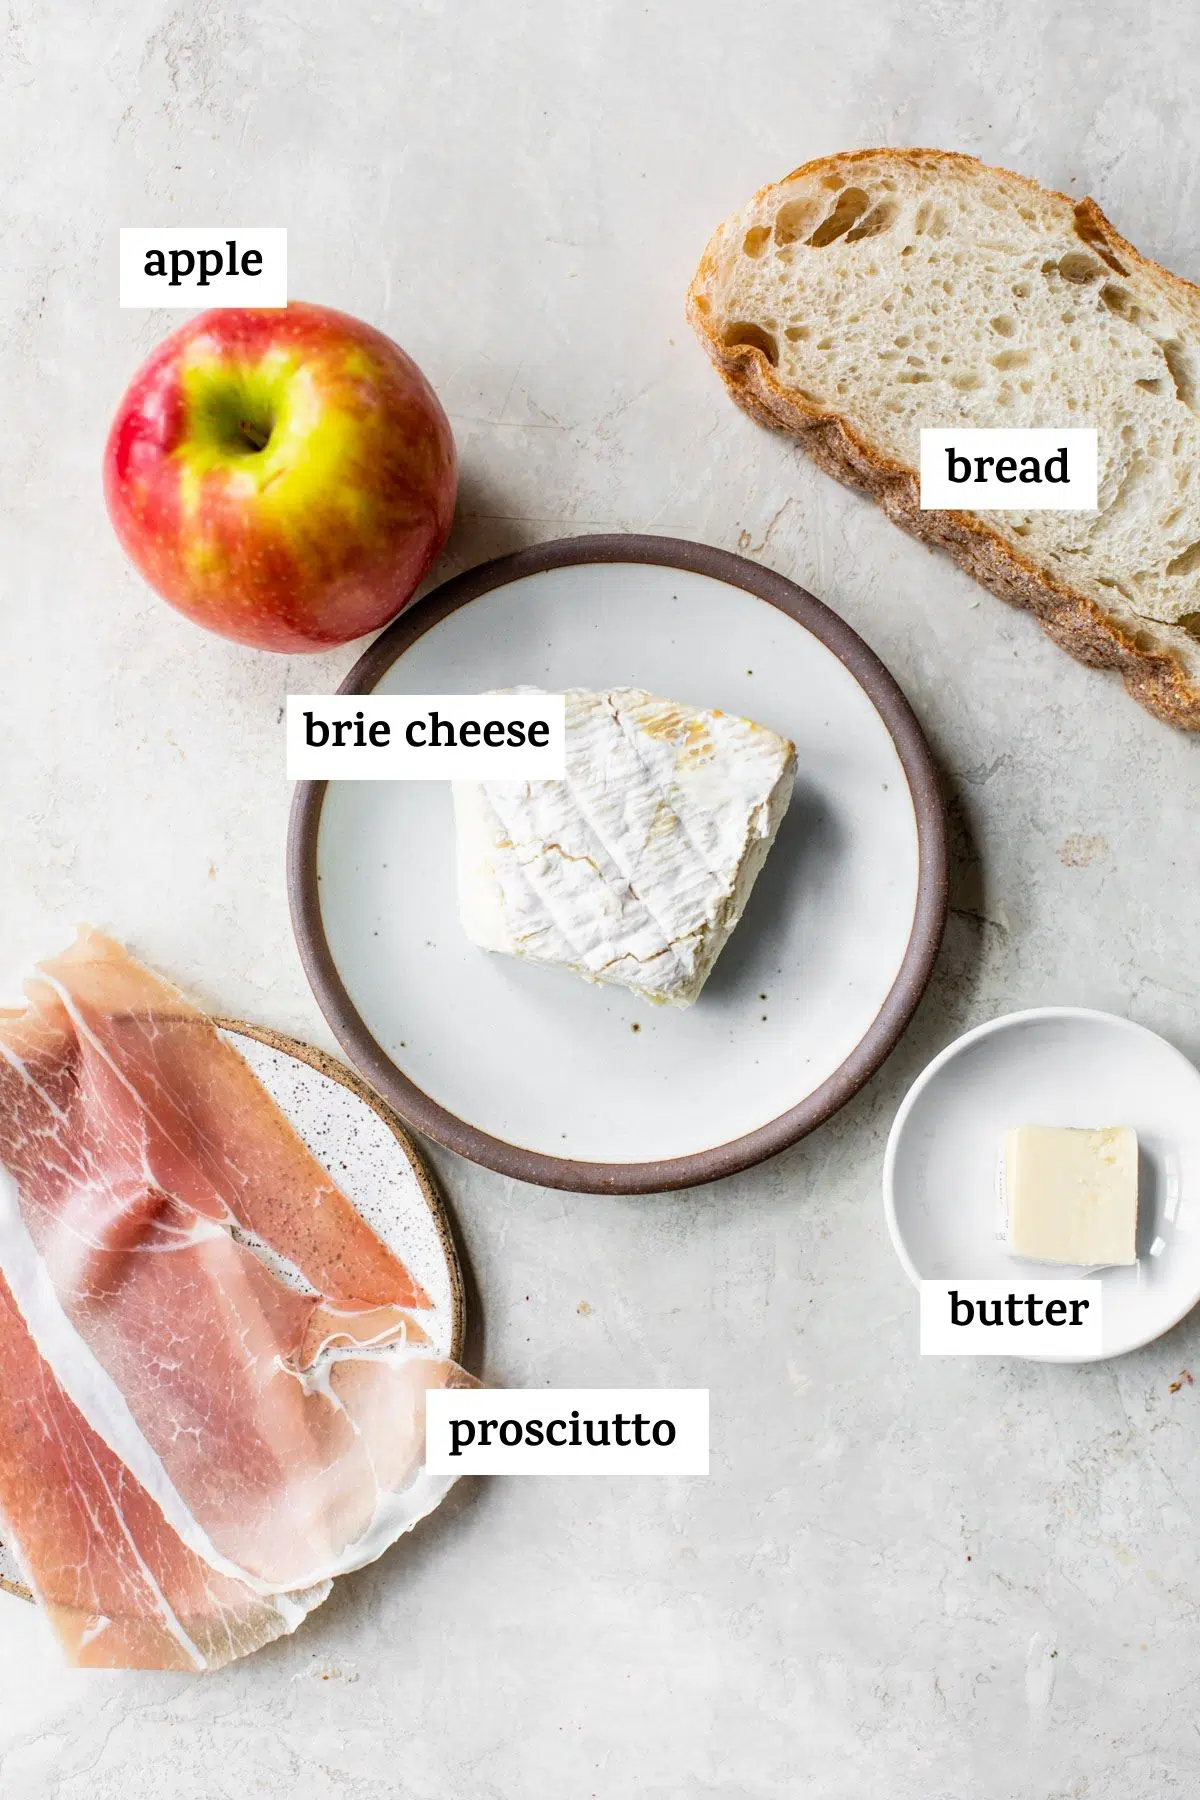 ingredients to make a grilled cheese like brie cheese and an apple